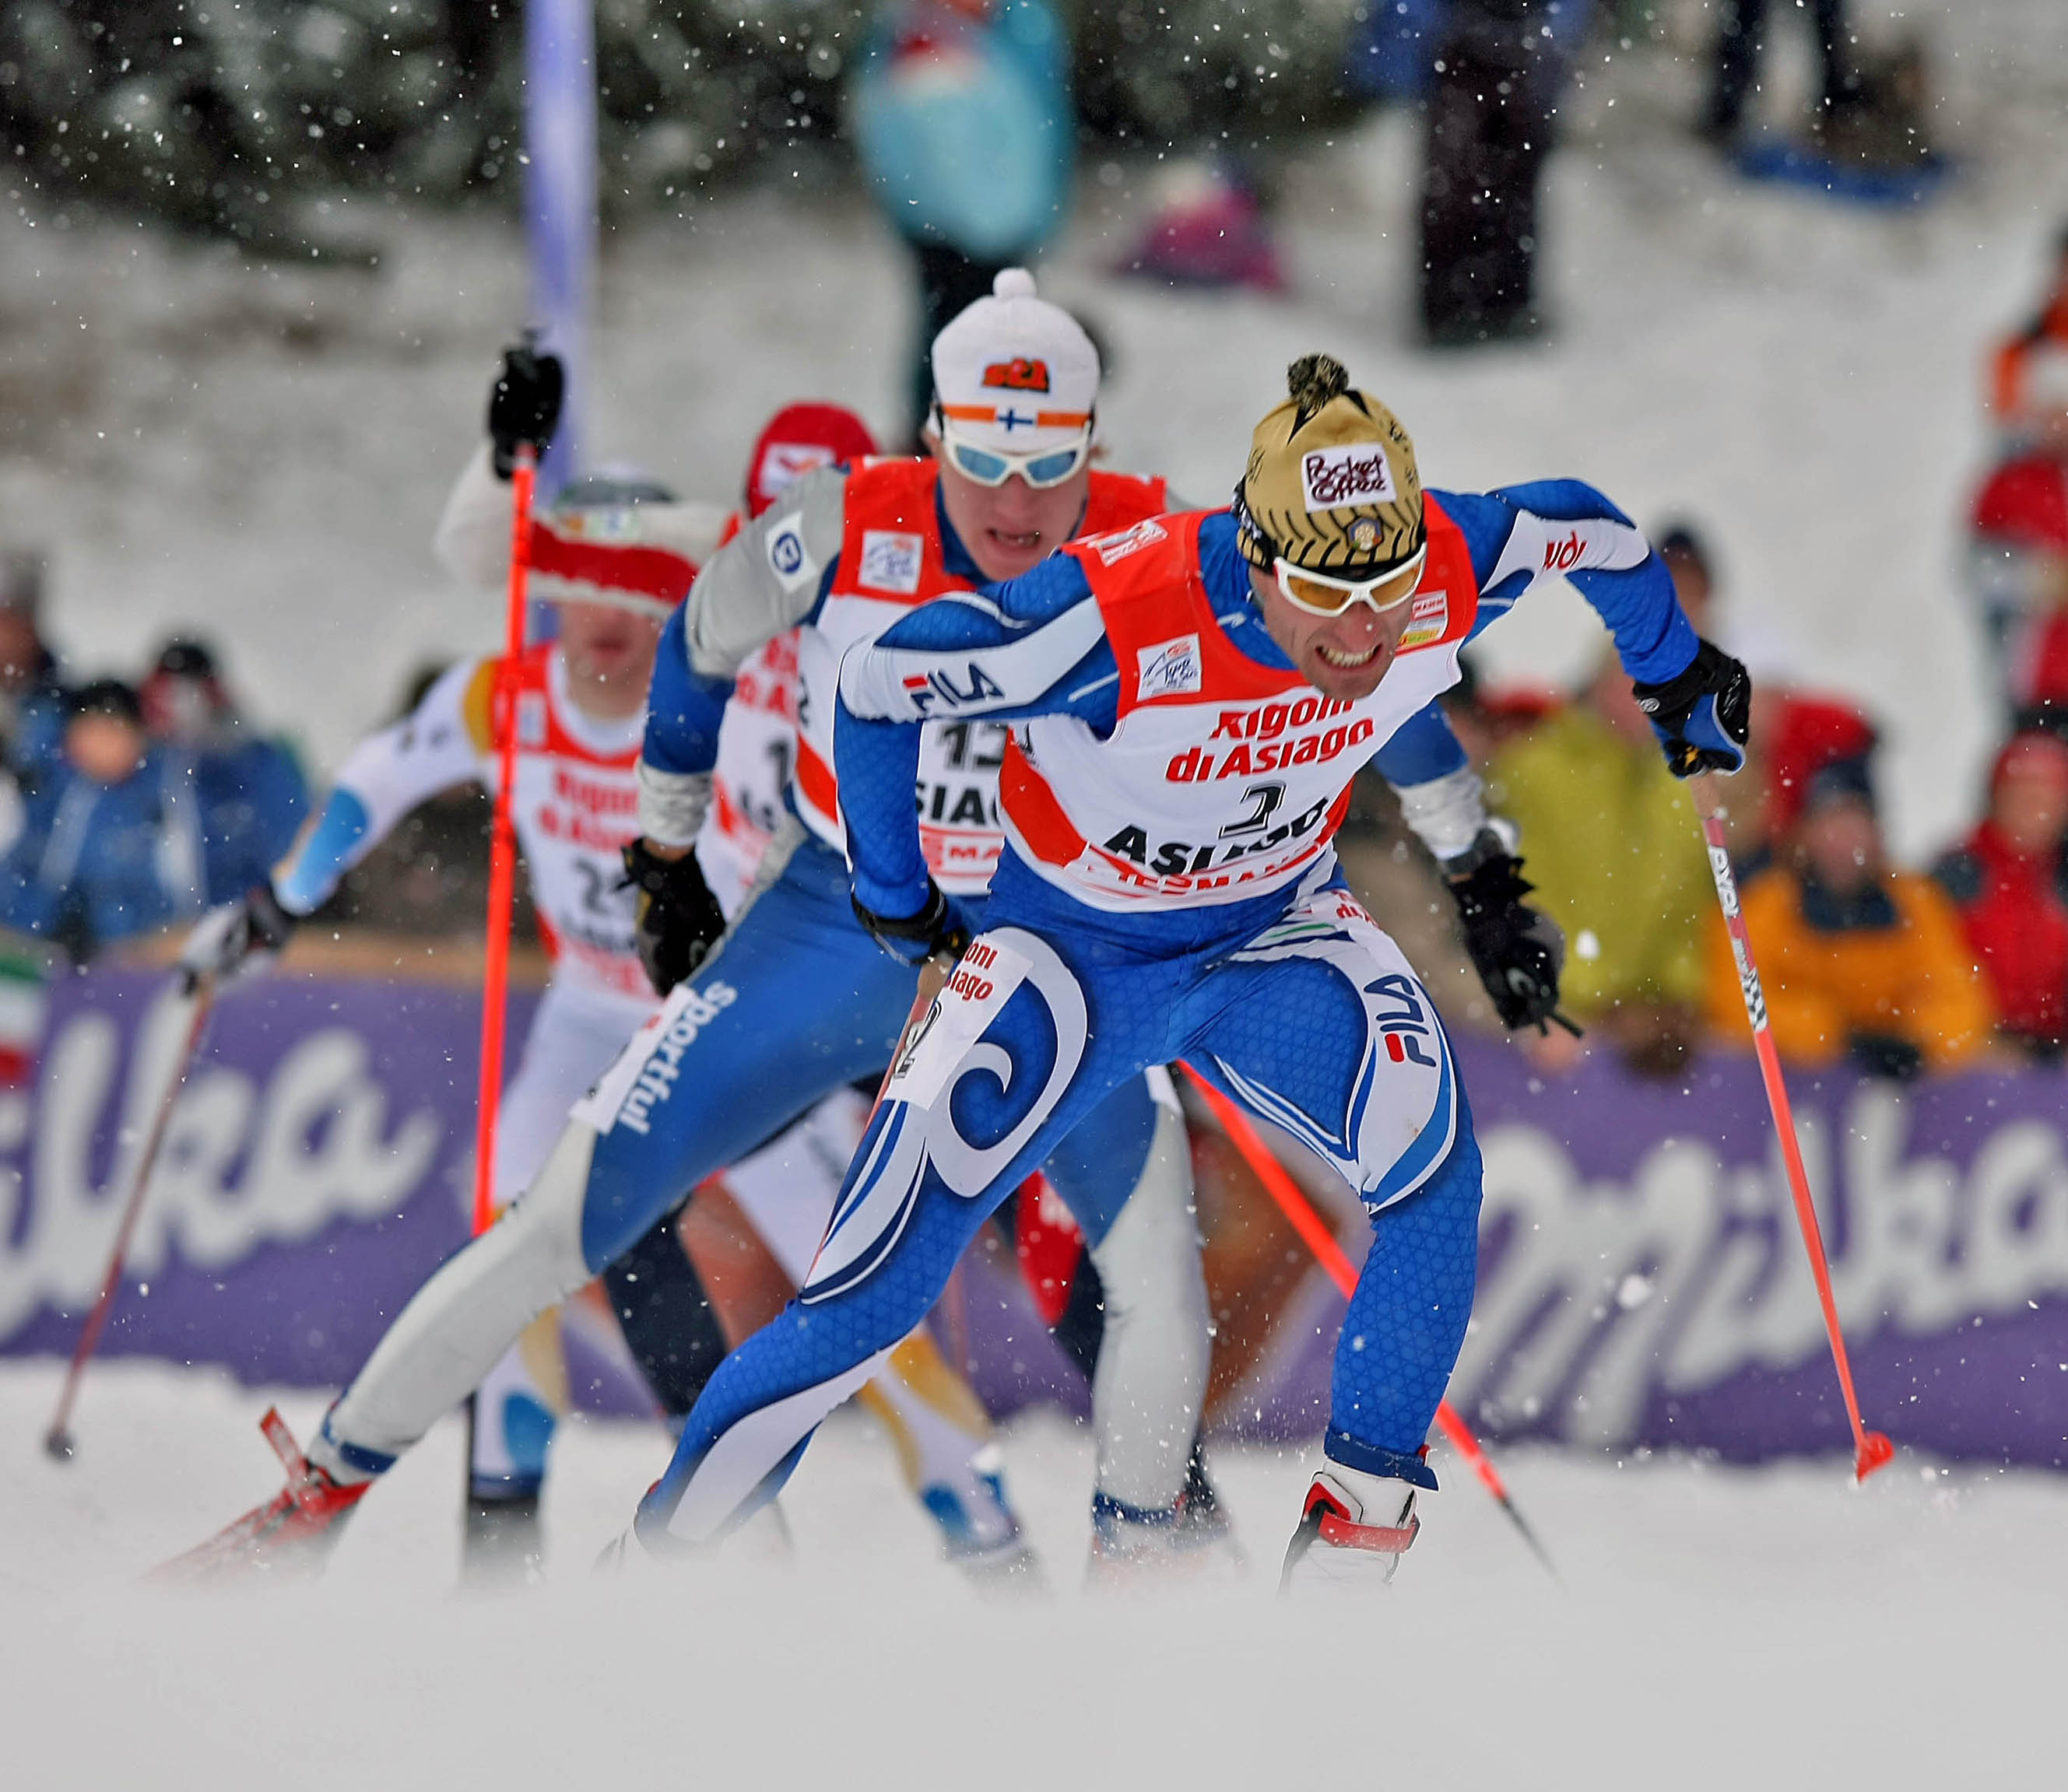 Asiago Cross Country Ski World Cup 2013